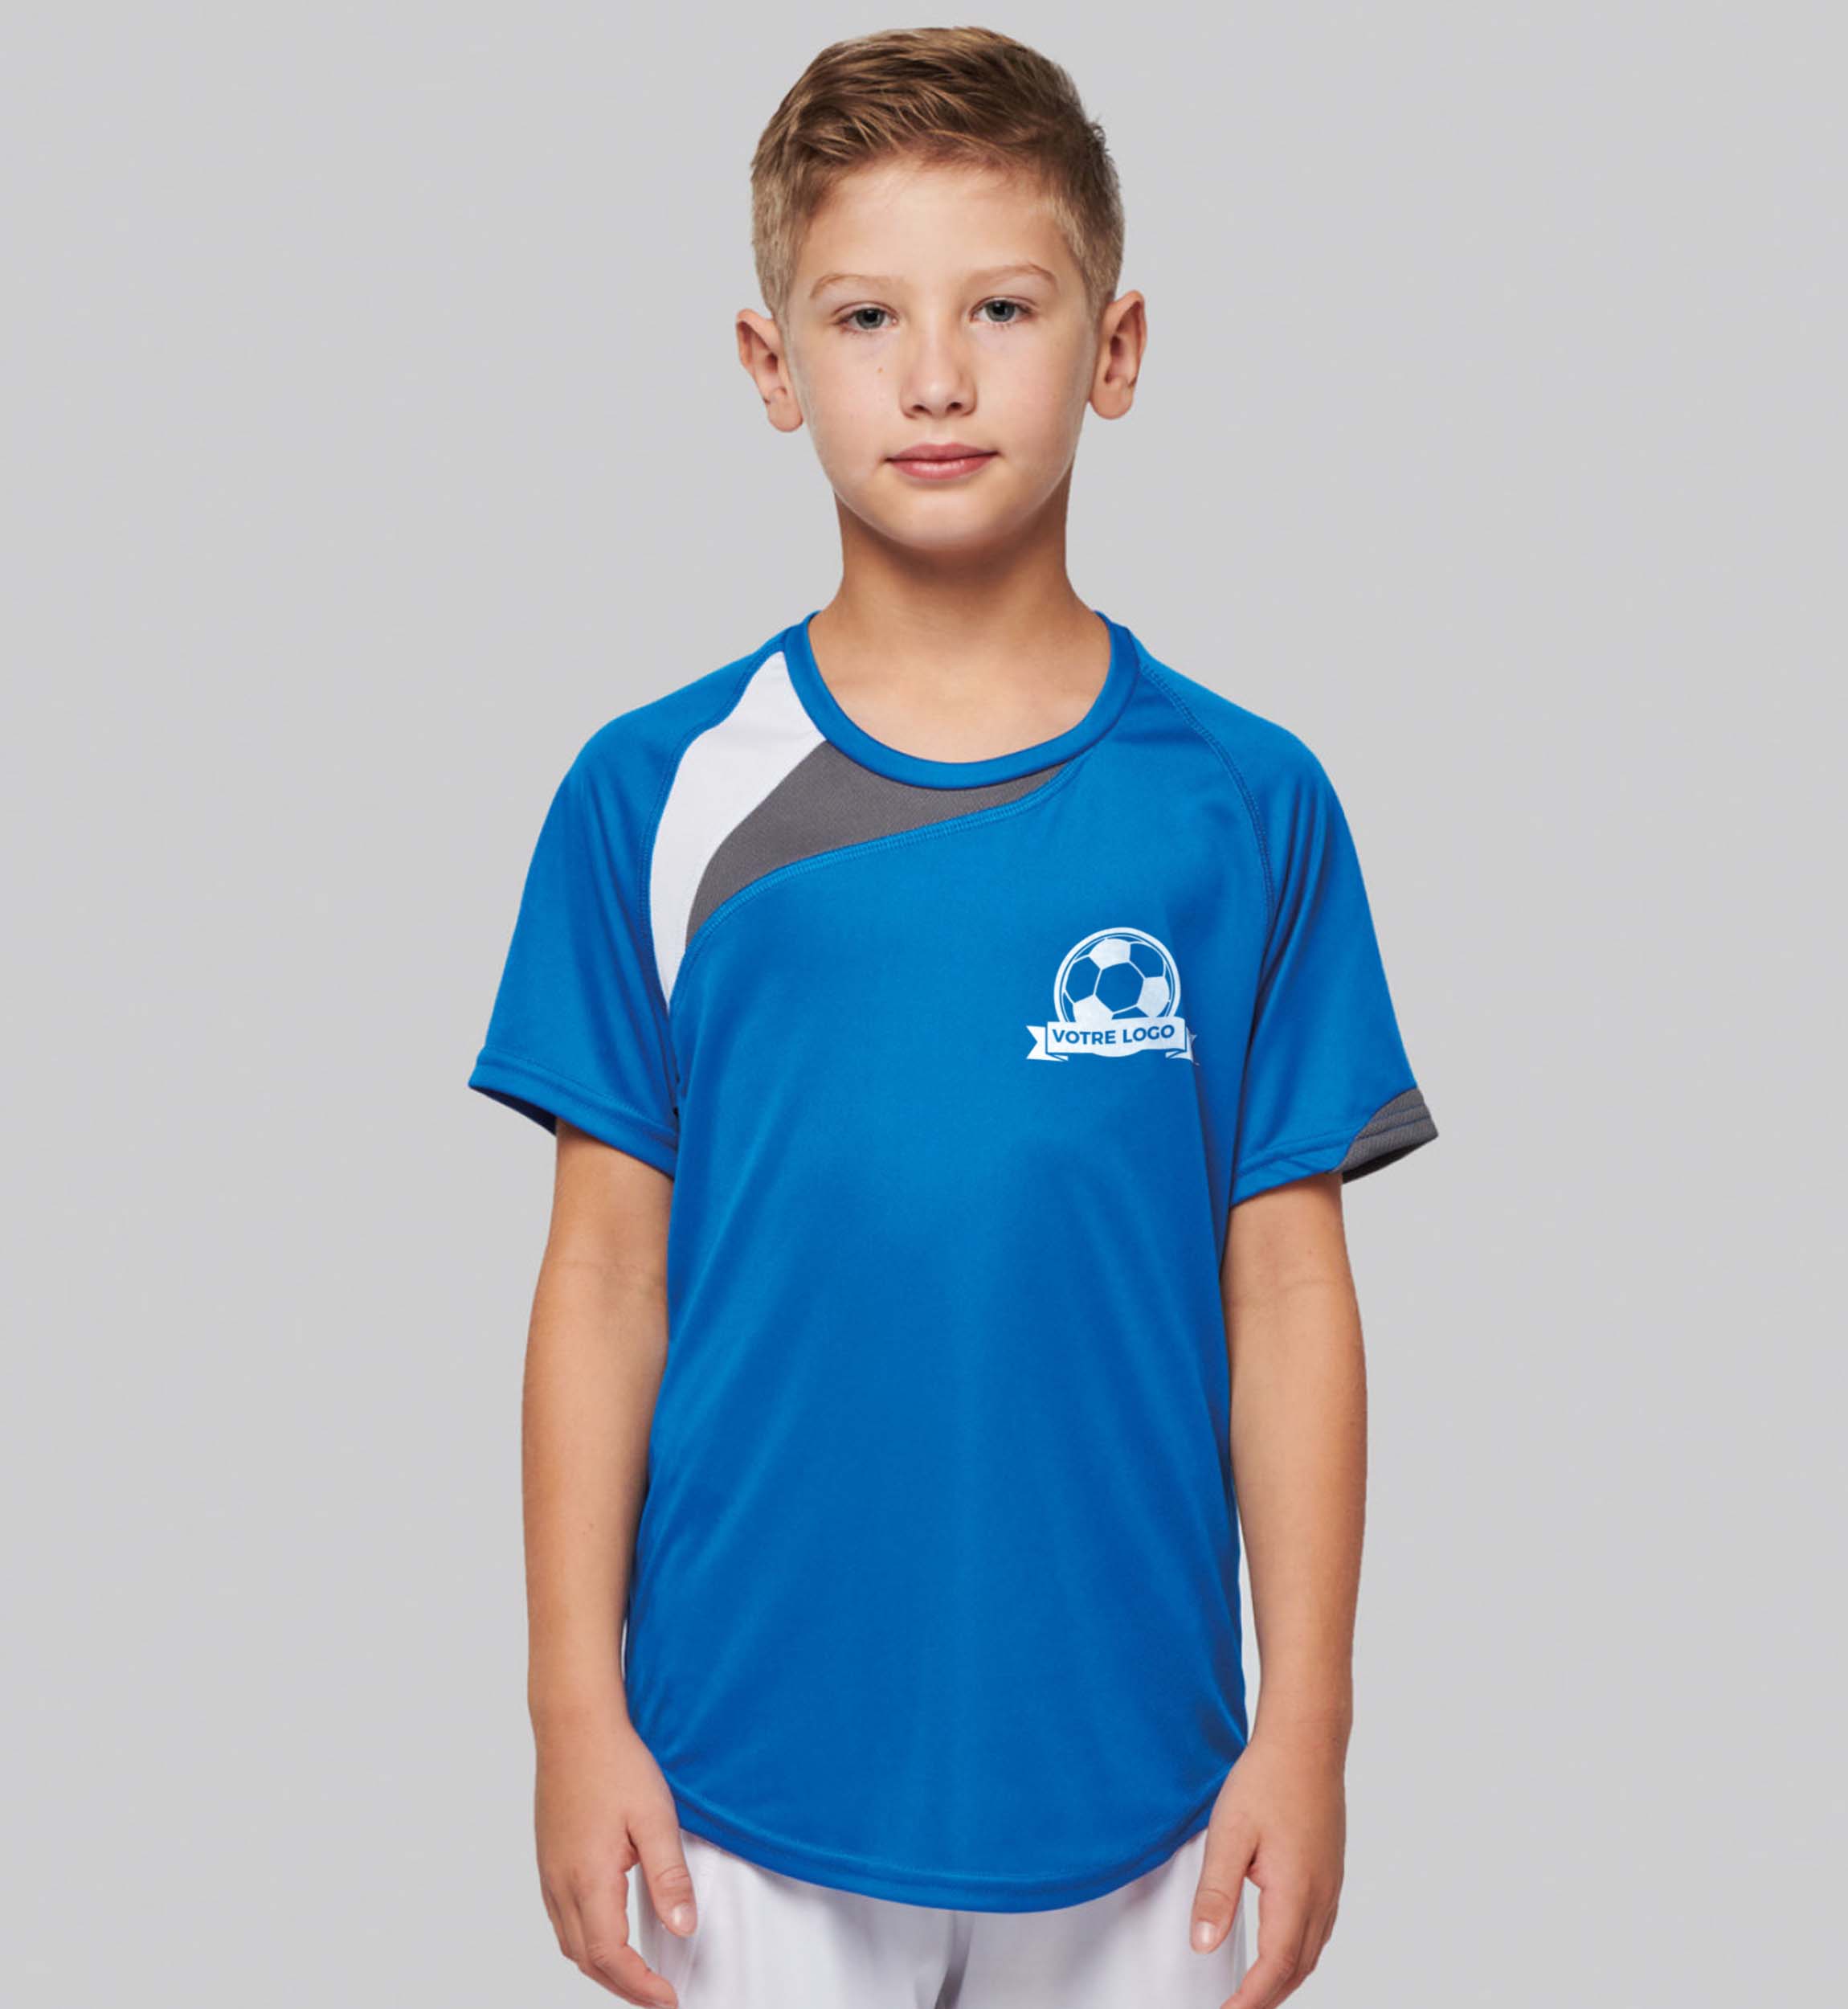 Customize Your Child's Sports T-Shirt With Tunetoo. Make All His Sports Activities Unique. 